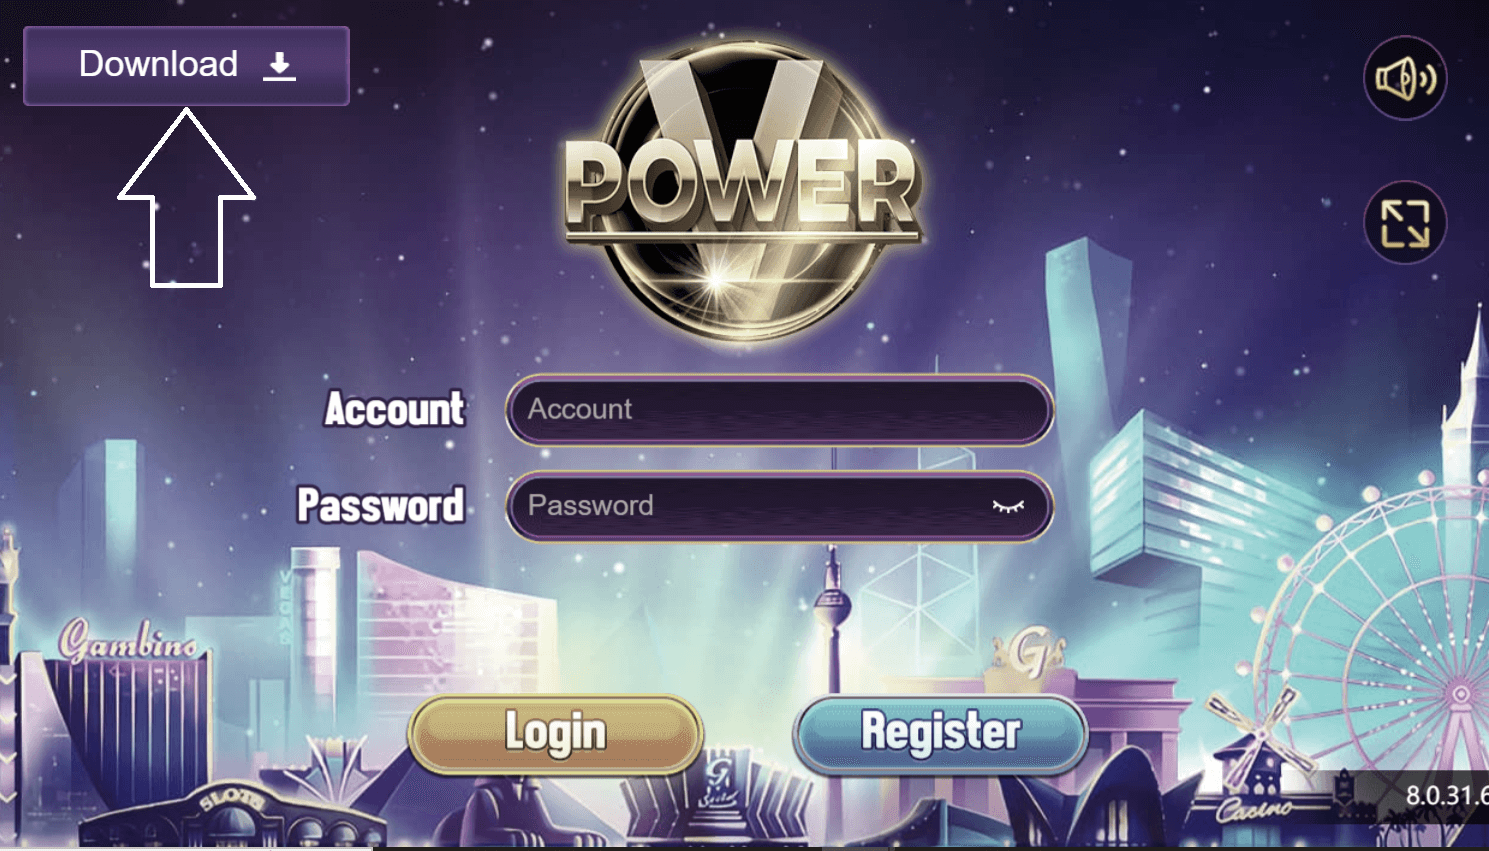 click on download in vpower777 website